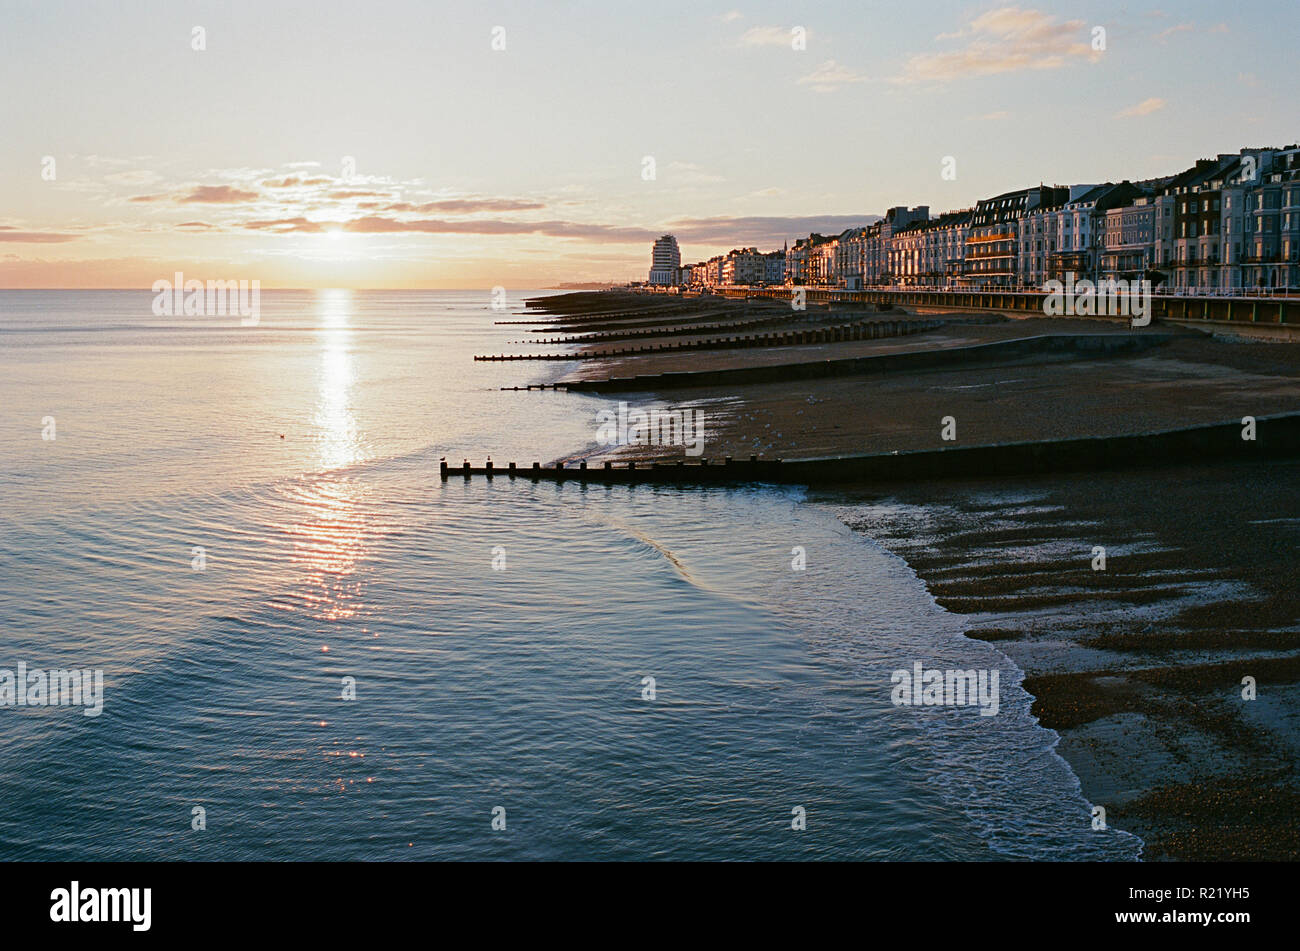 Seafont at St Leonards On Sea, Hastings, East Sussex UK, at dusk, from Hastings Pier Stock Photo